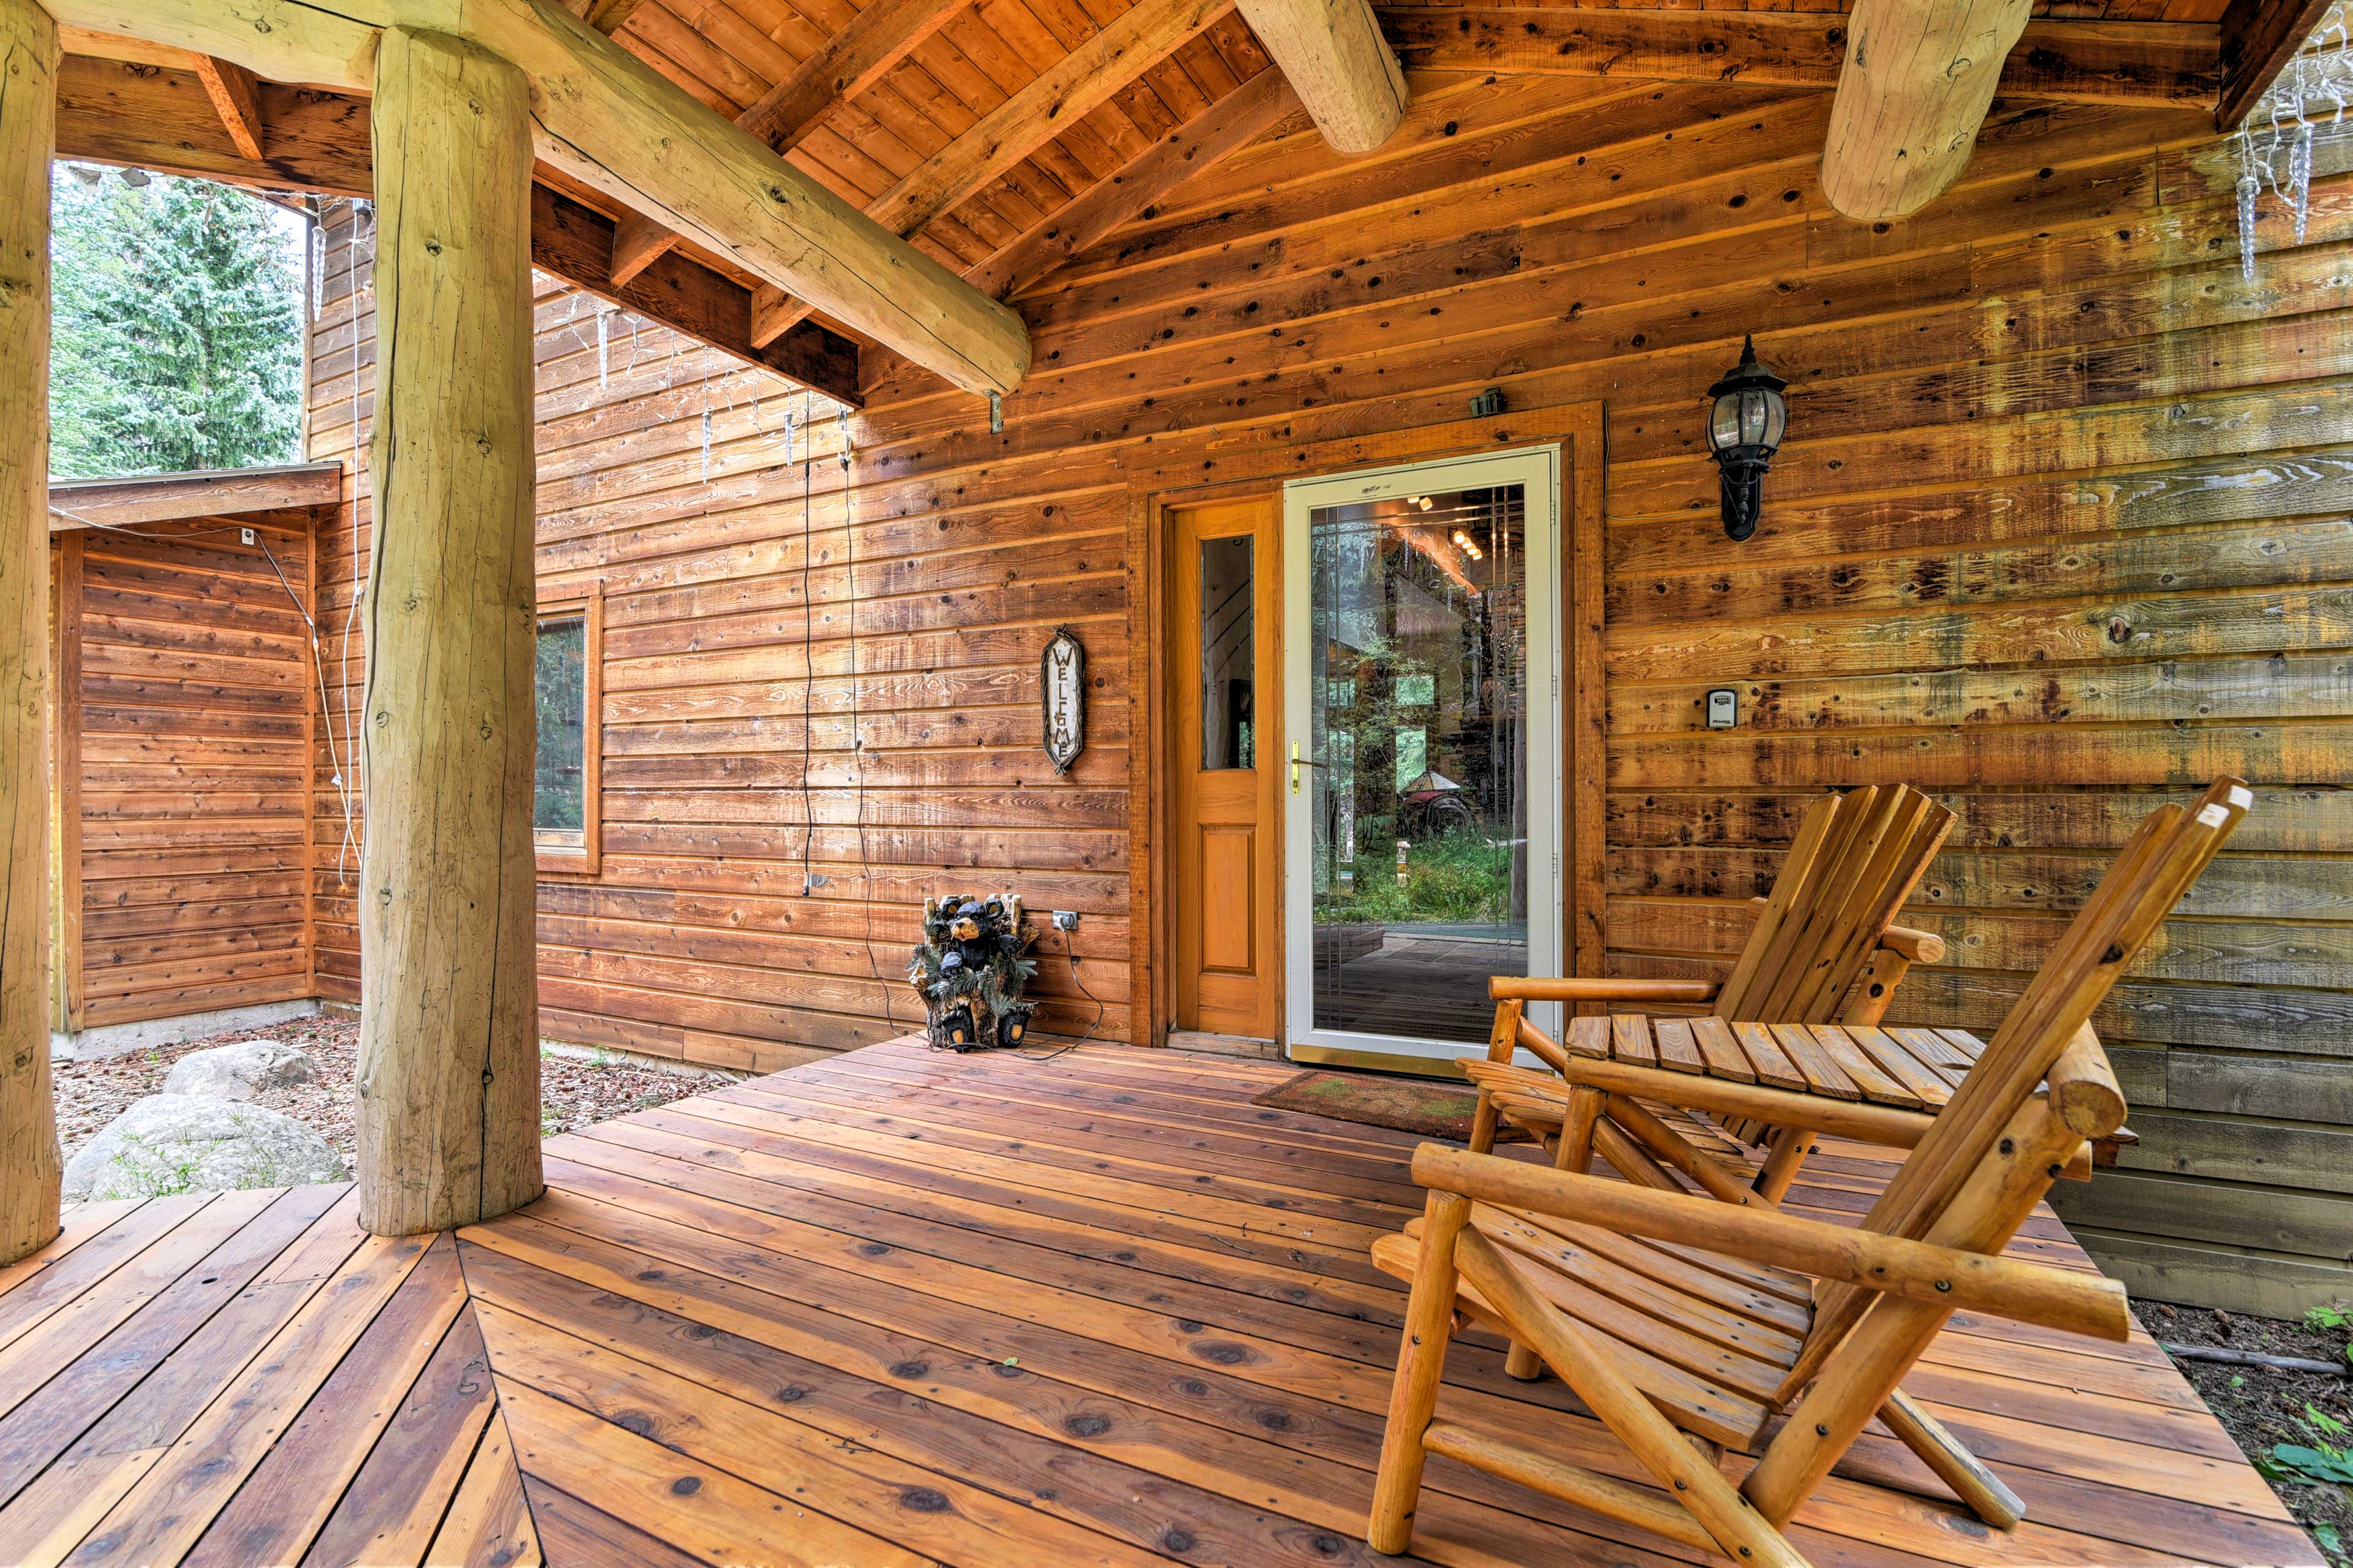 This 6-person cabin channels a picturesque rustic elegance!